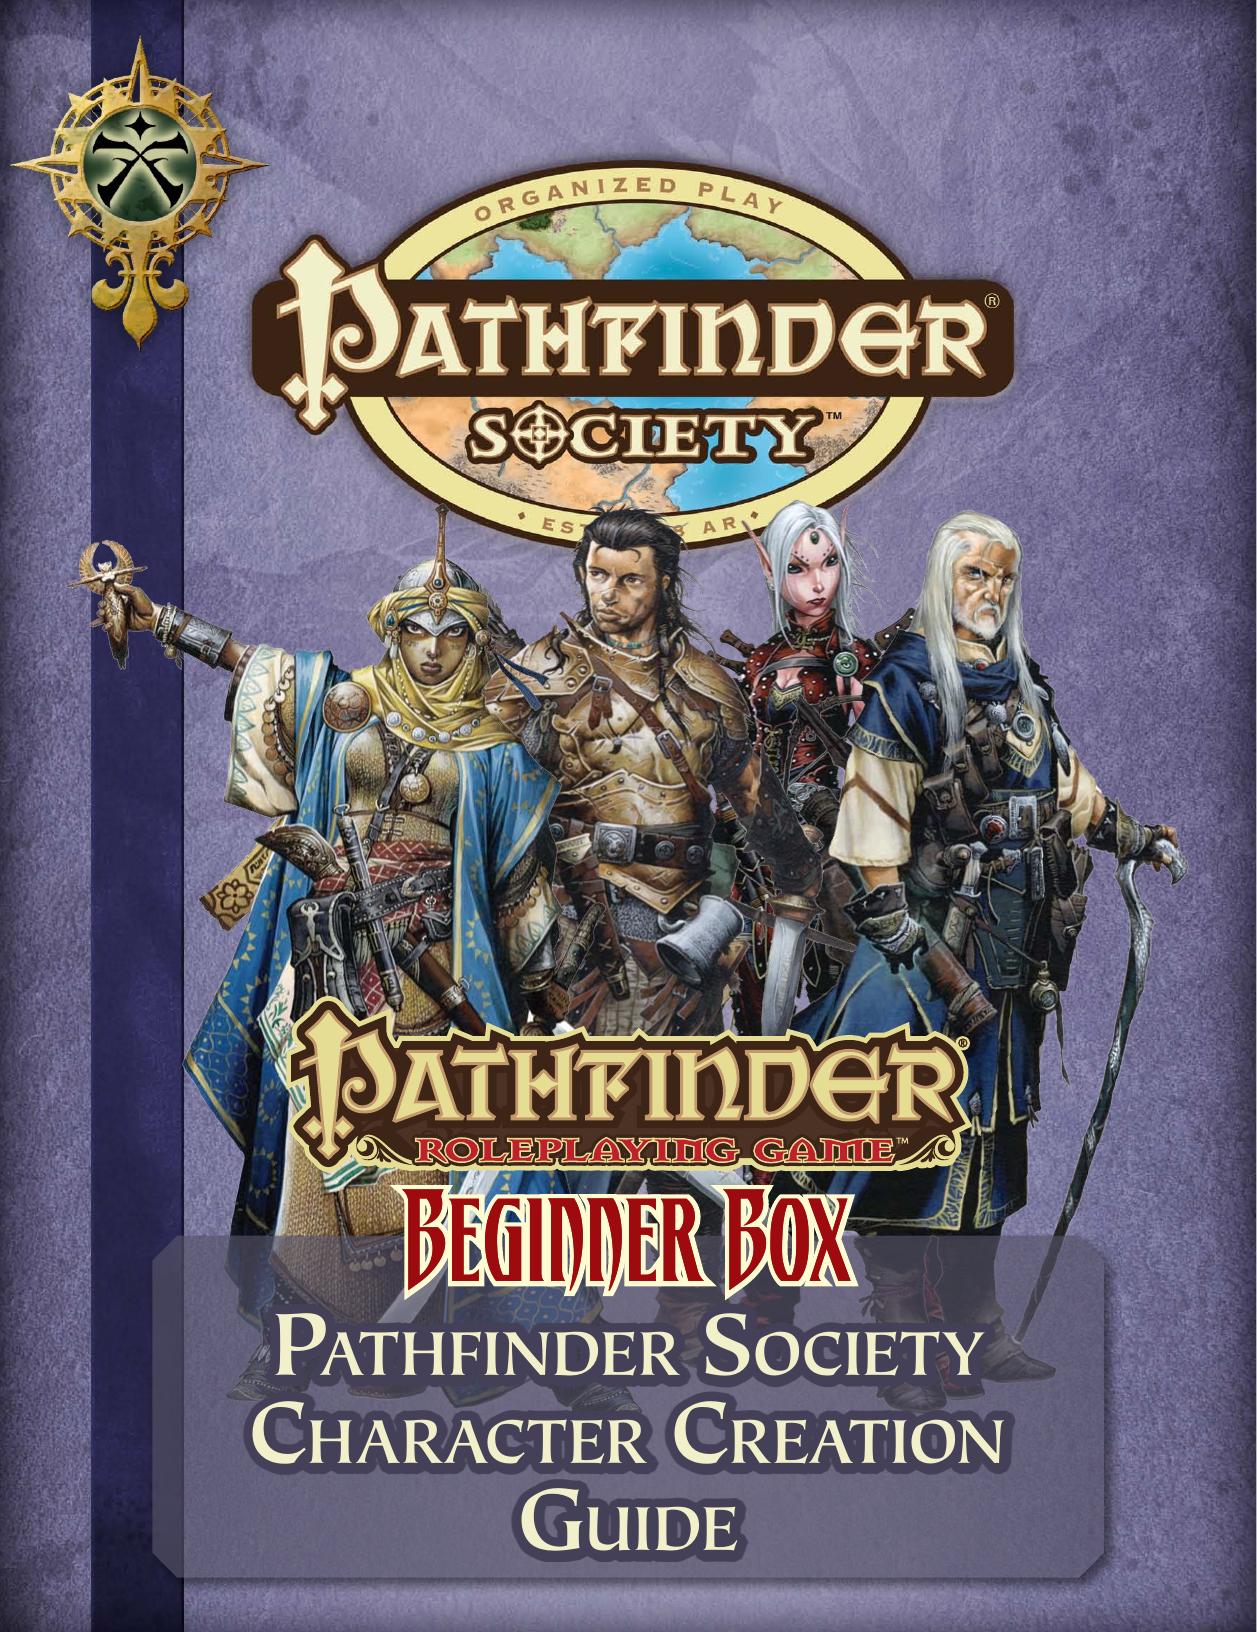 Pathfinder Society Character Creation Guide